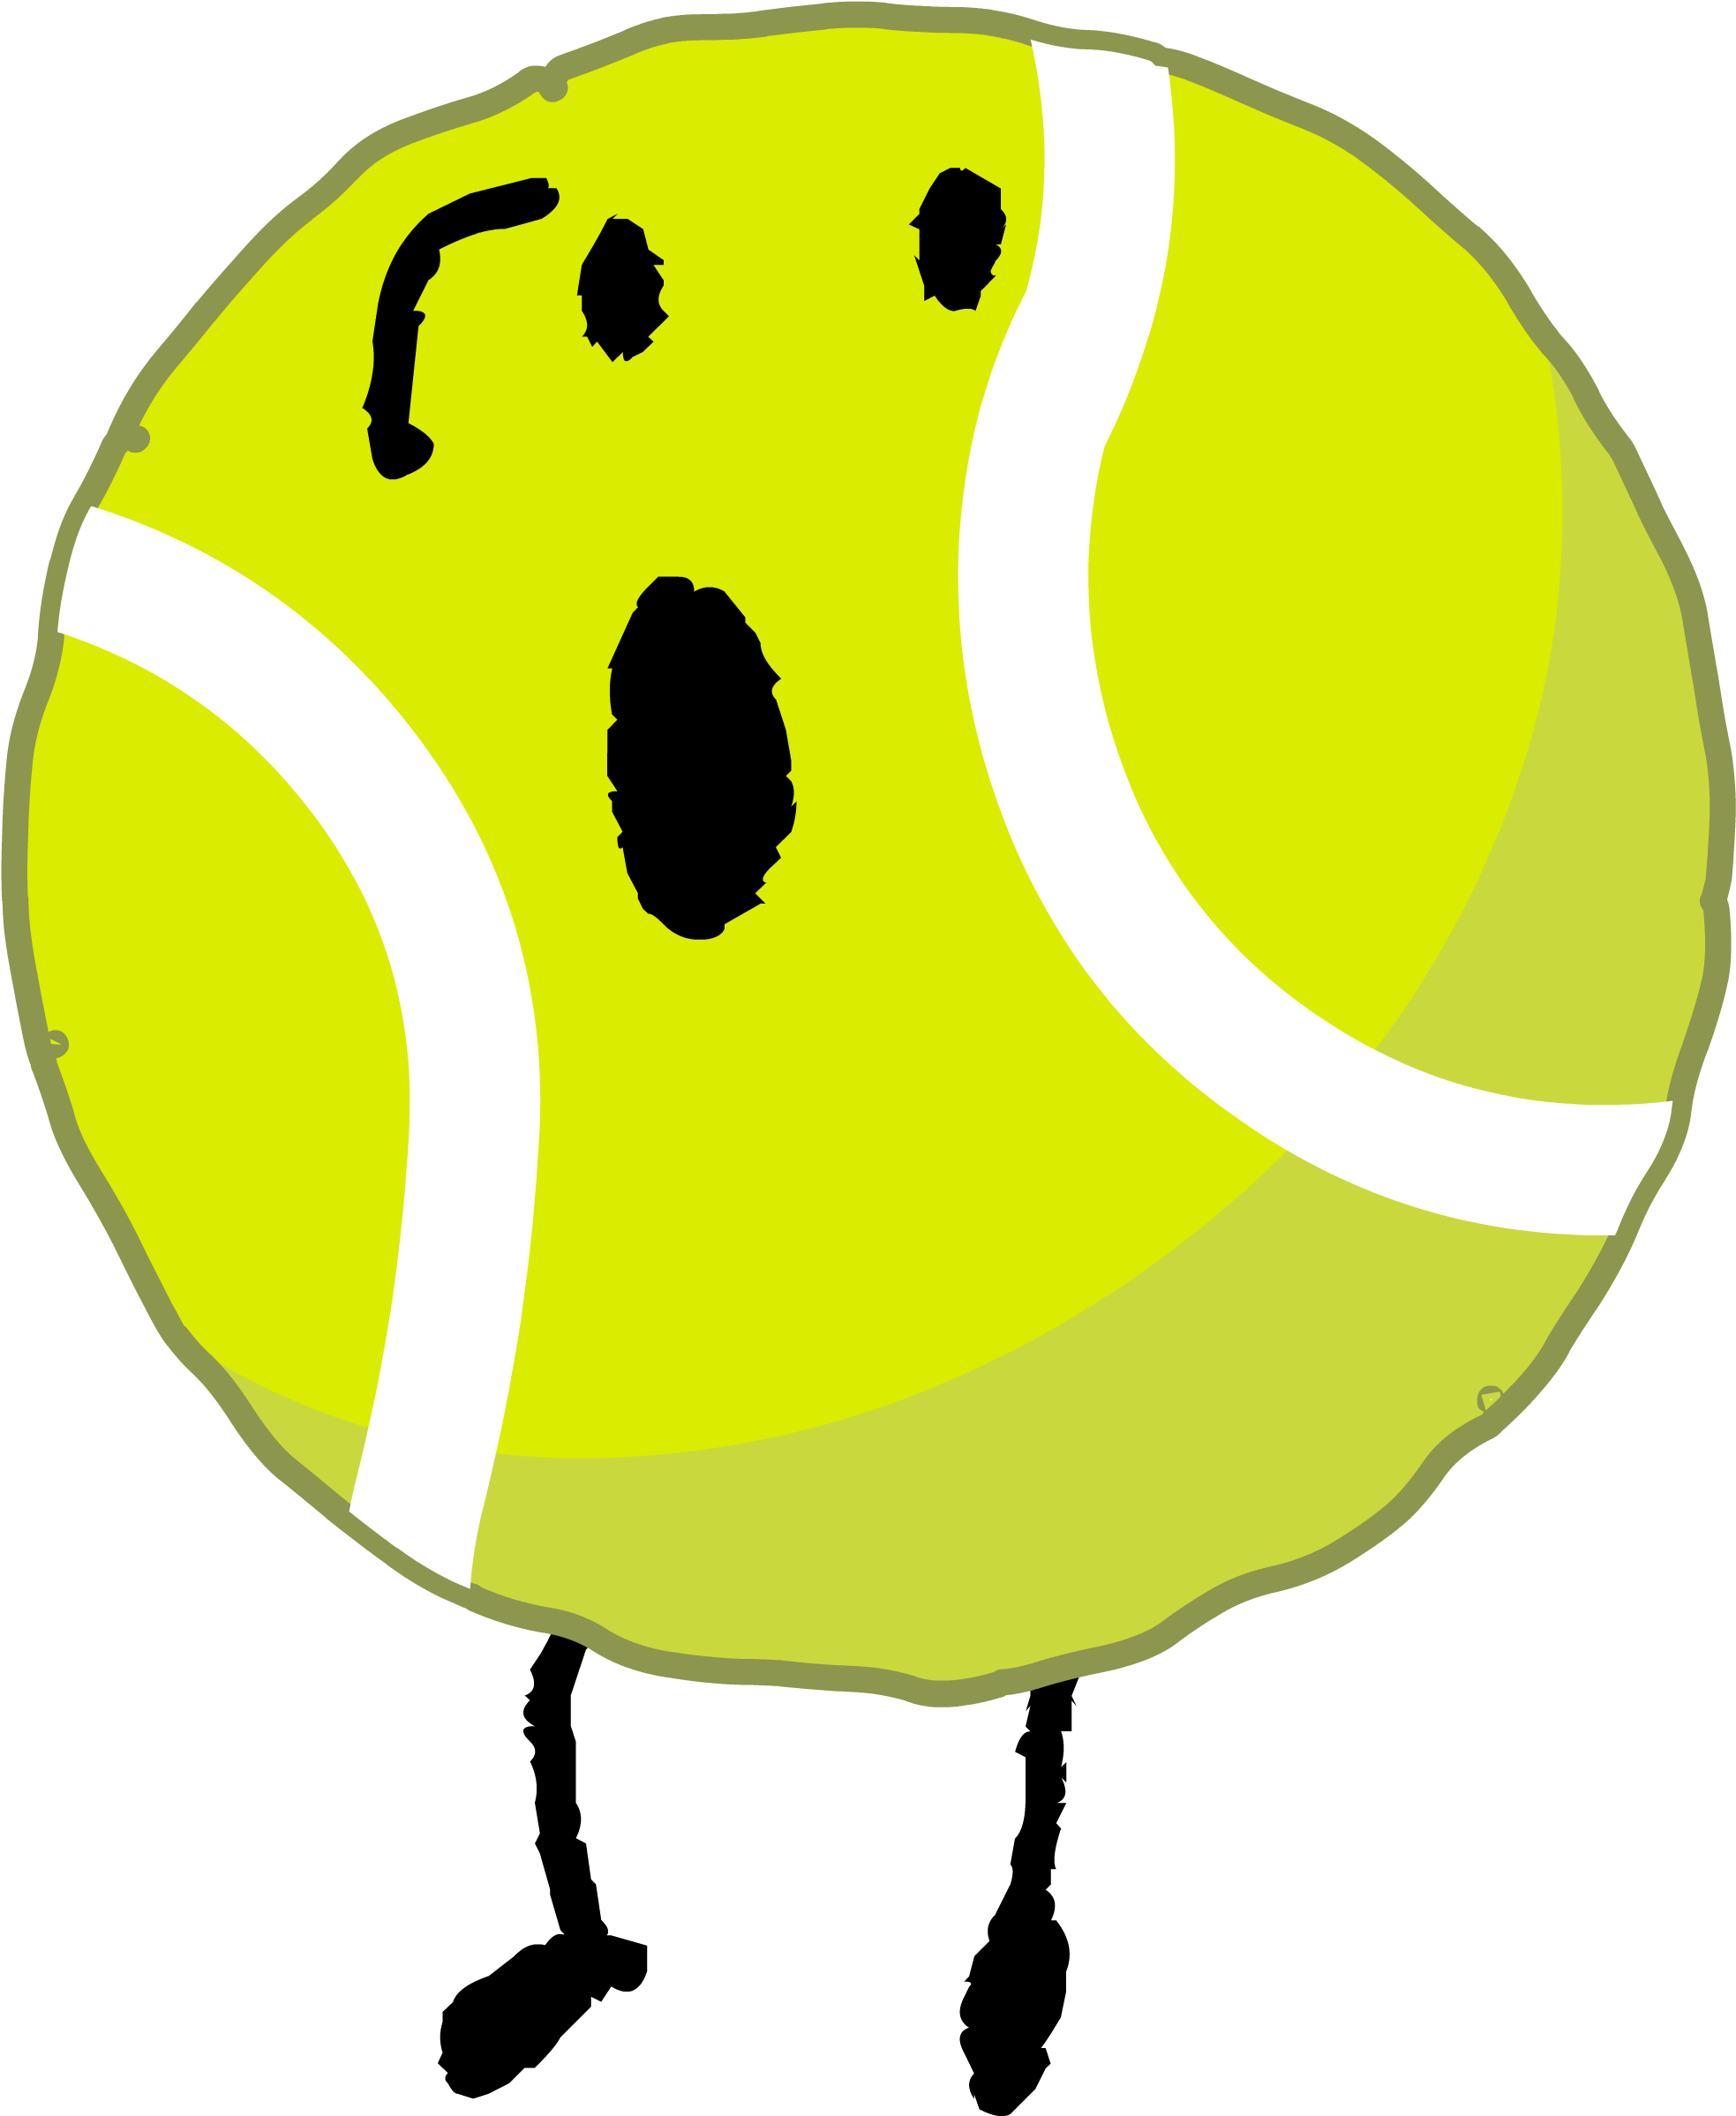 Tennis Ball Clipart Bfb - Bfb Tennis Ball Intro - Png Download (2090x2469), Png Download